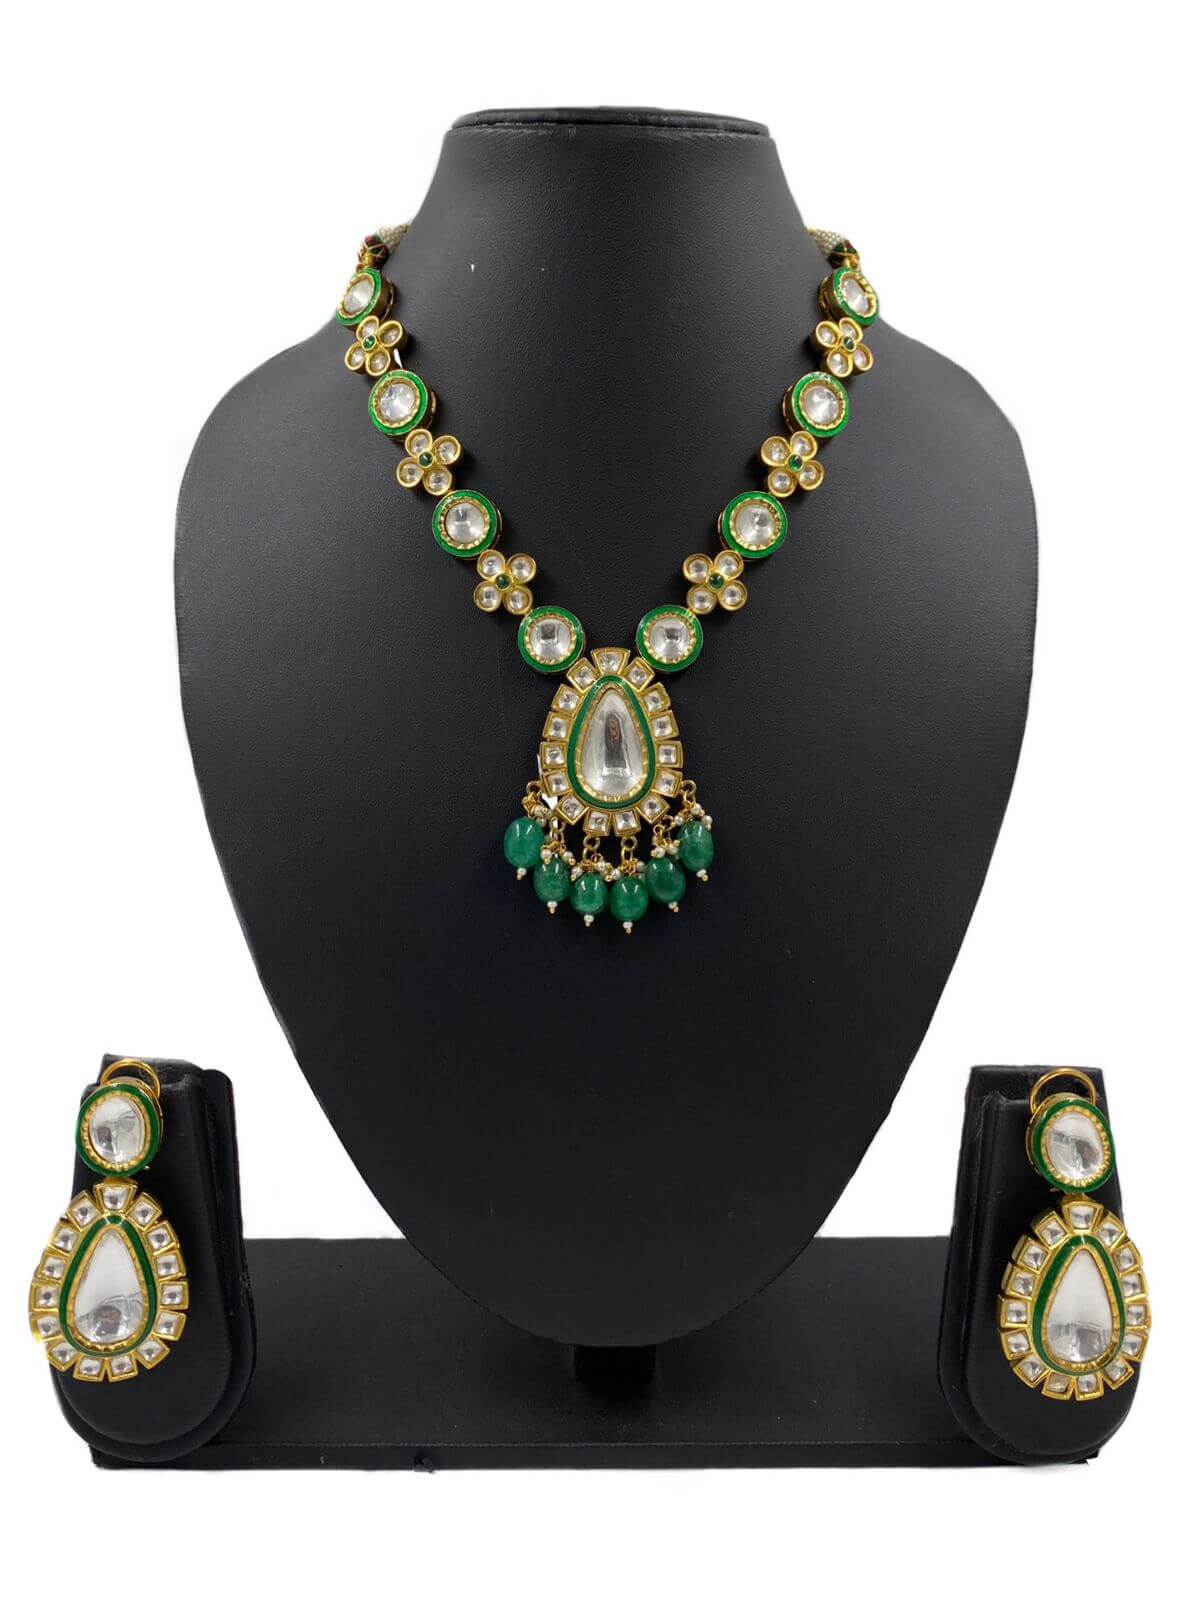  Gold Plated Short Green Polki Kundan Jewellery Necklace Set is the perfect fashion jewellery accessory